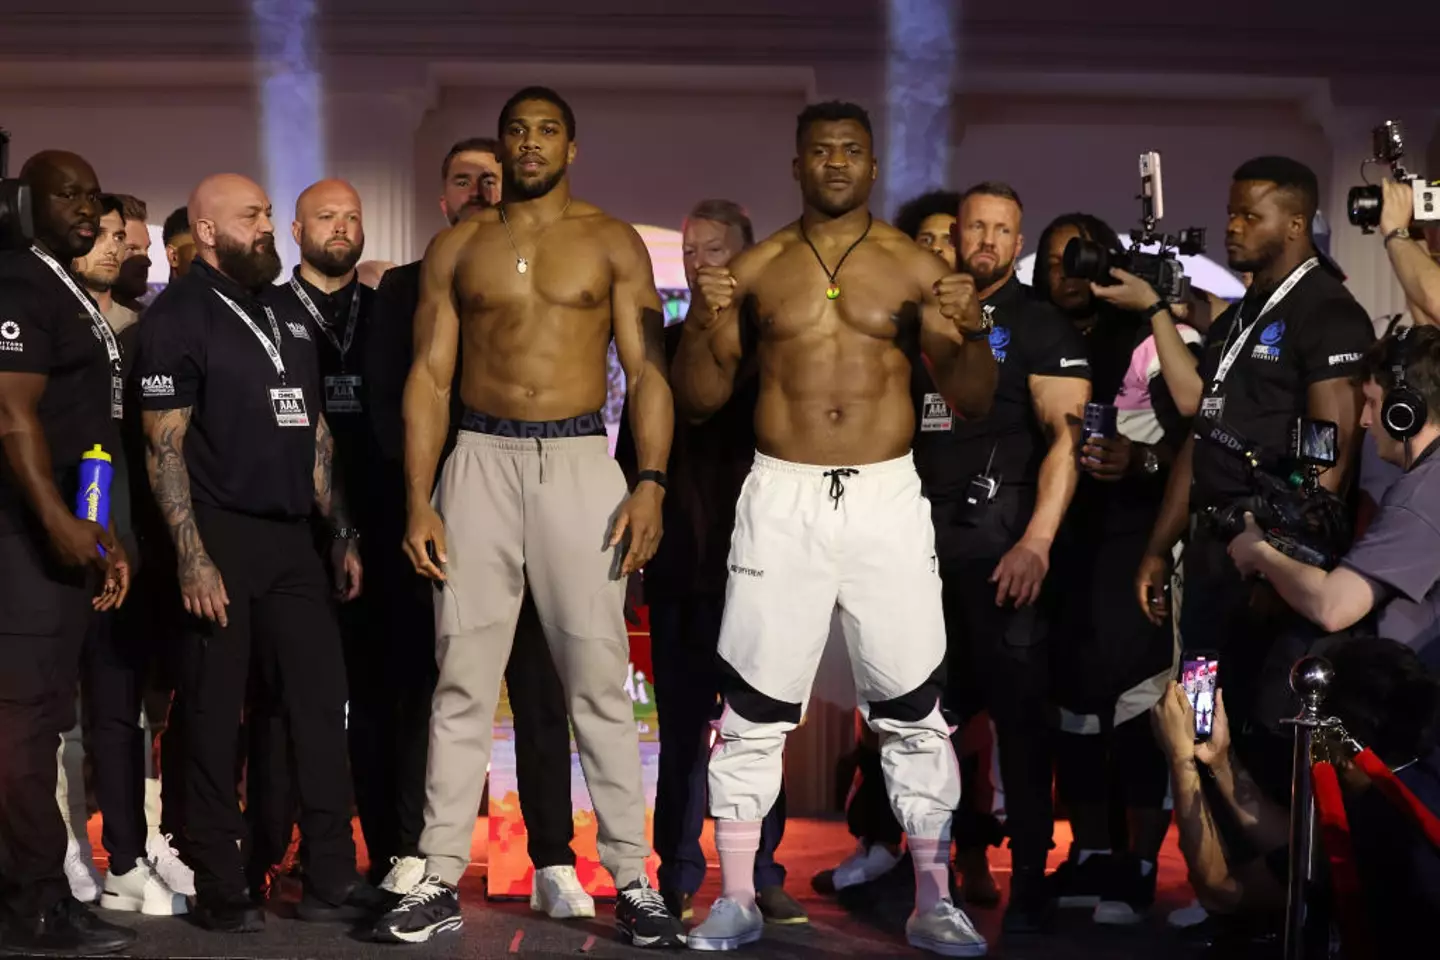 Joshua and Ngannou faced off in Kingdom Arena in Riyadh on Friday night (8 March).